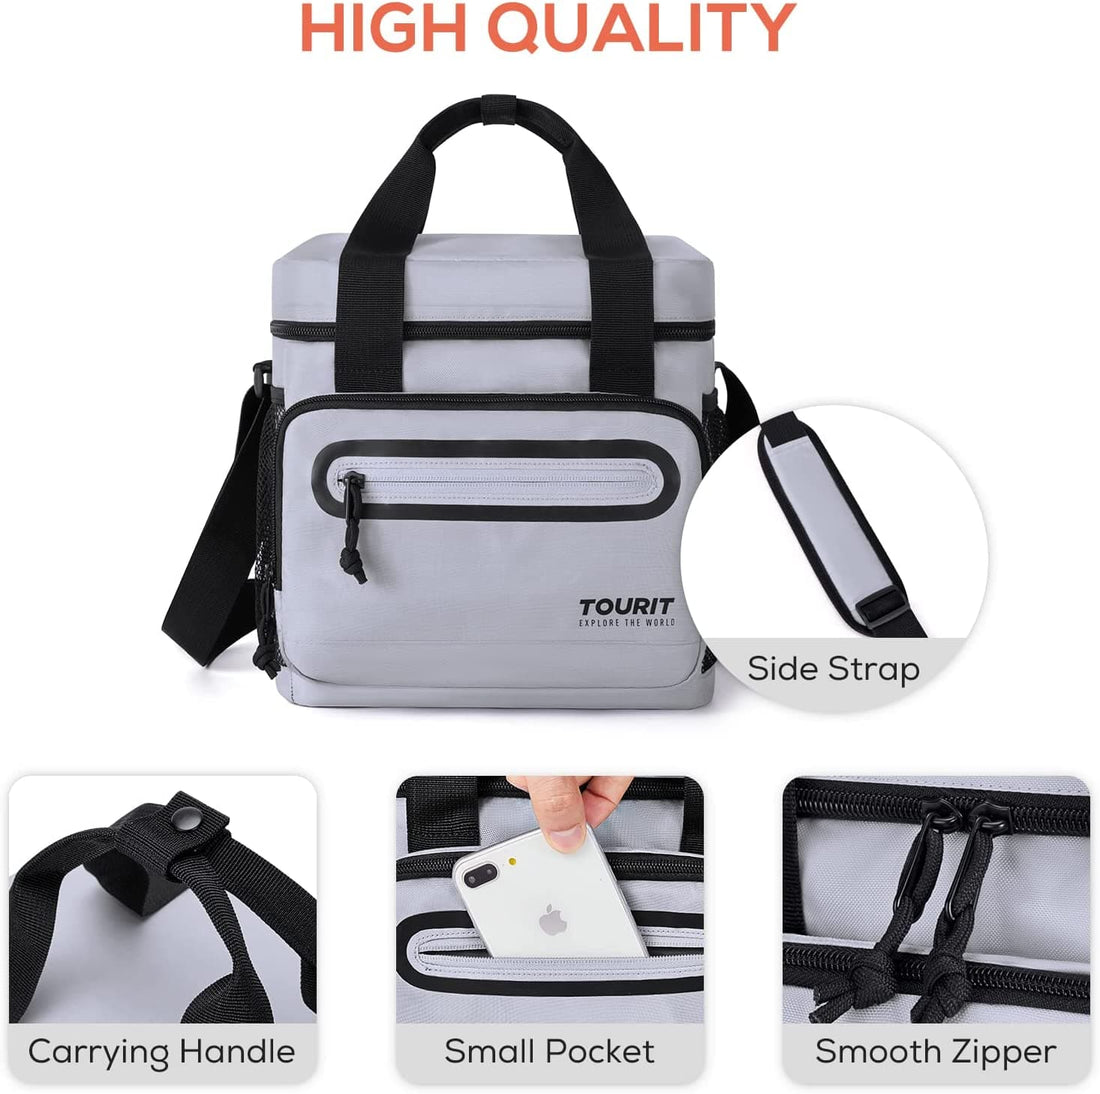 Large Lunch Bag Insulated Cooler